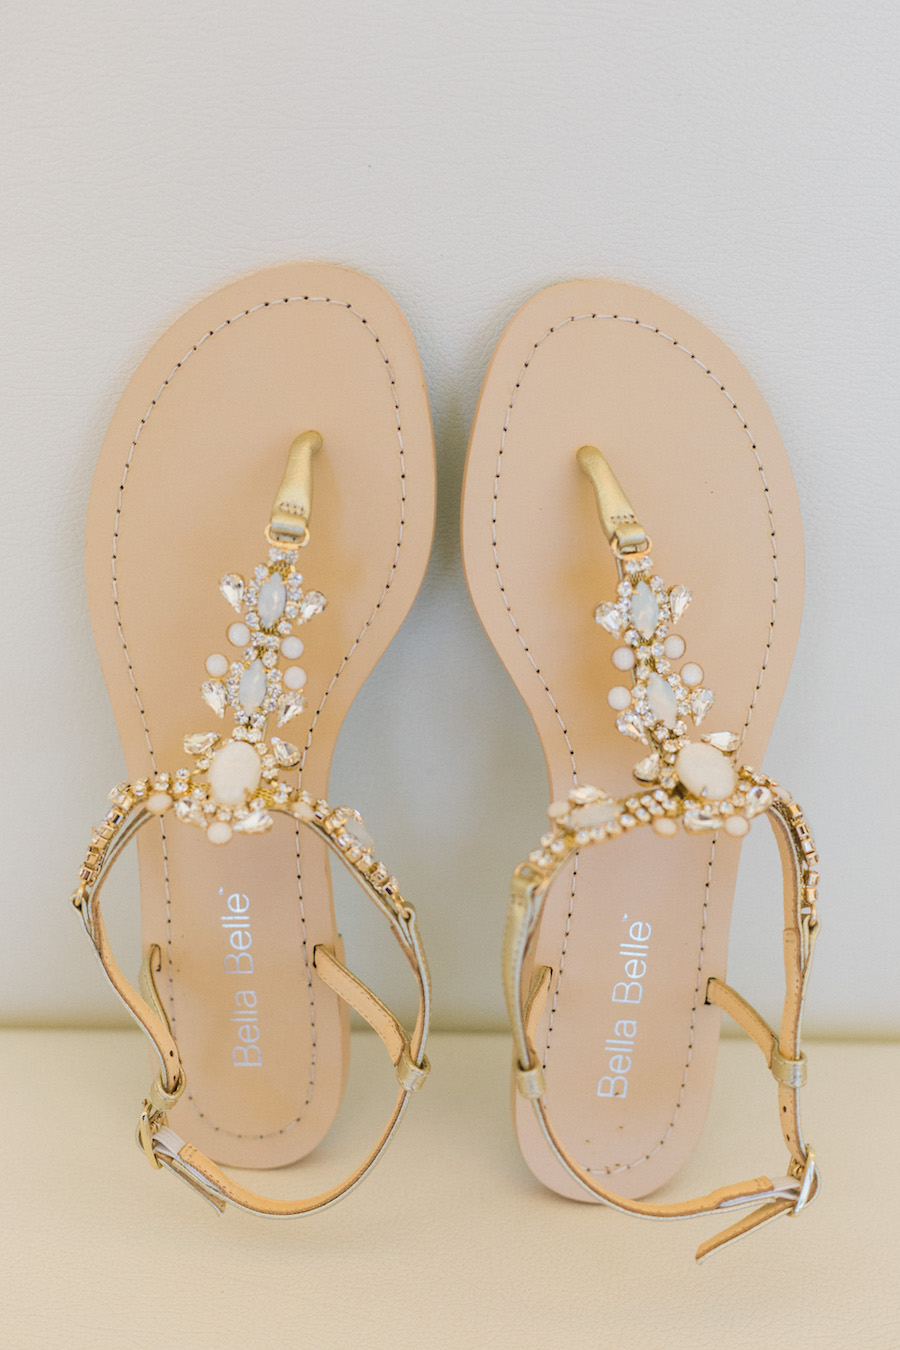 Bridal gold and champagne wedding shoes | Crystal and rhinestone wedding shoes | Flat bridal shoes | Bella Belle